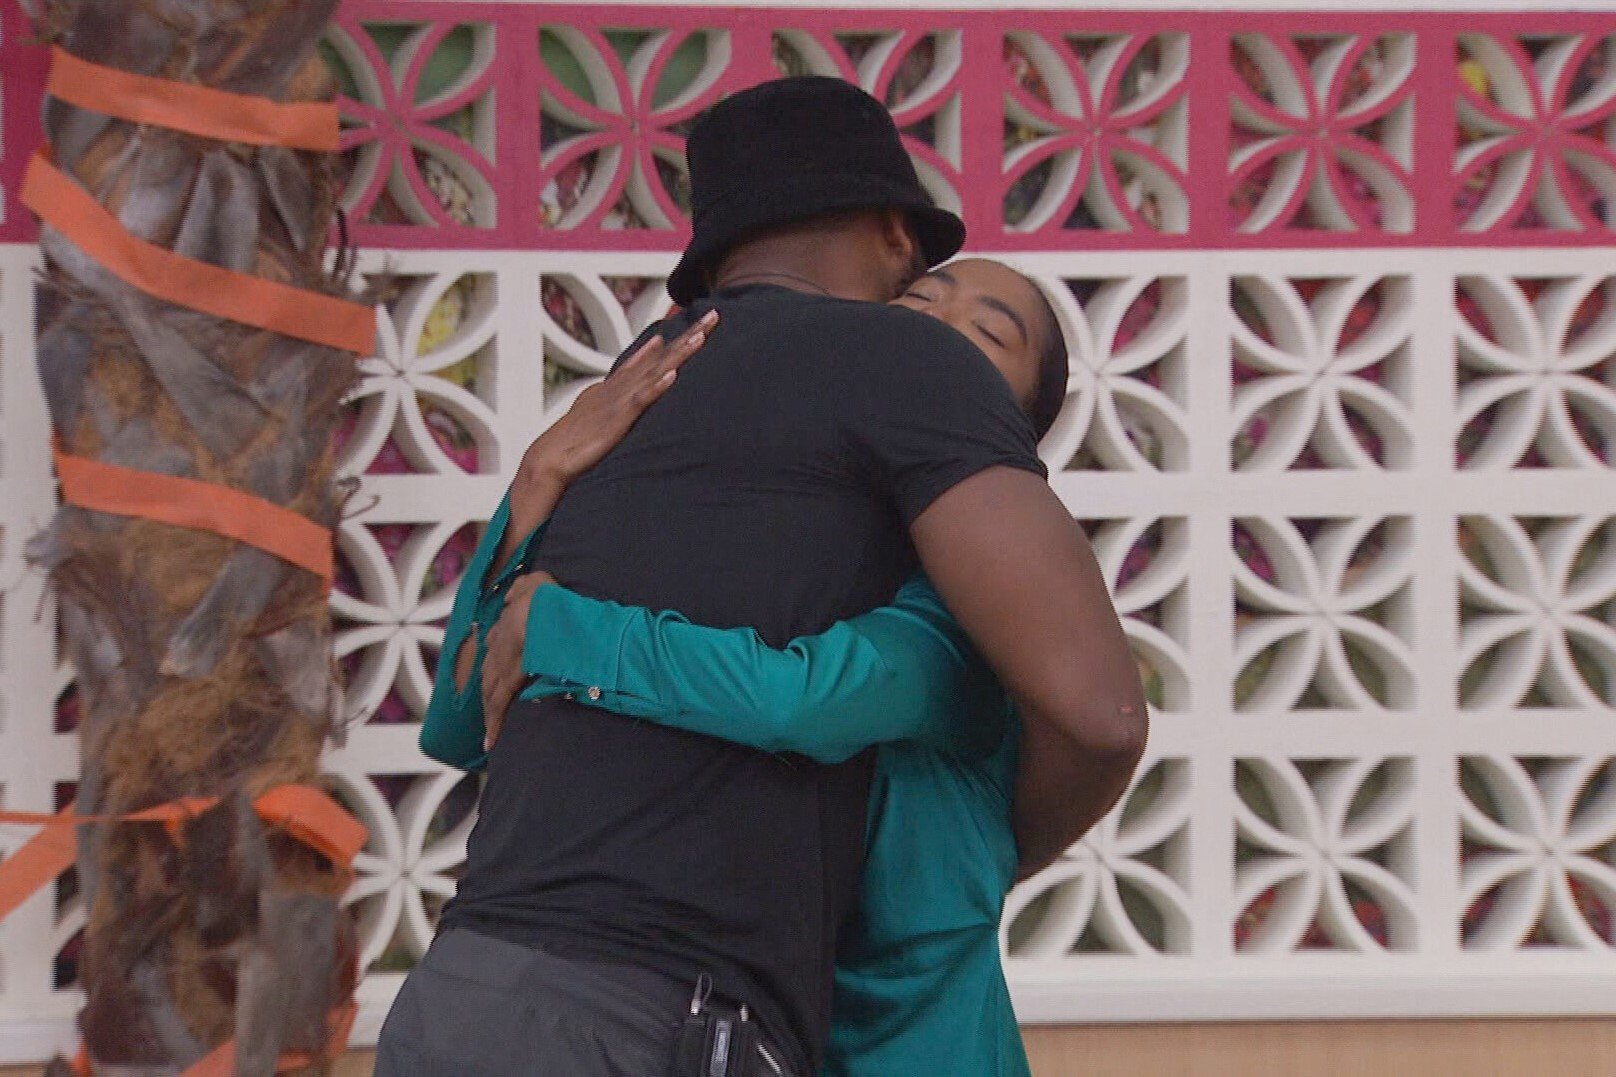 Monte Taylor and Taylor Hale, who star in 'Big Brother 24' on CBS, hug. Monte wears a black shirt, gray pants, and black bucket hat. Taylor wears a teal dress.